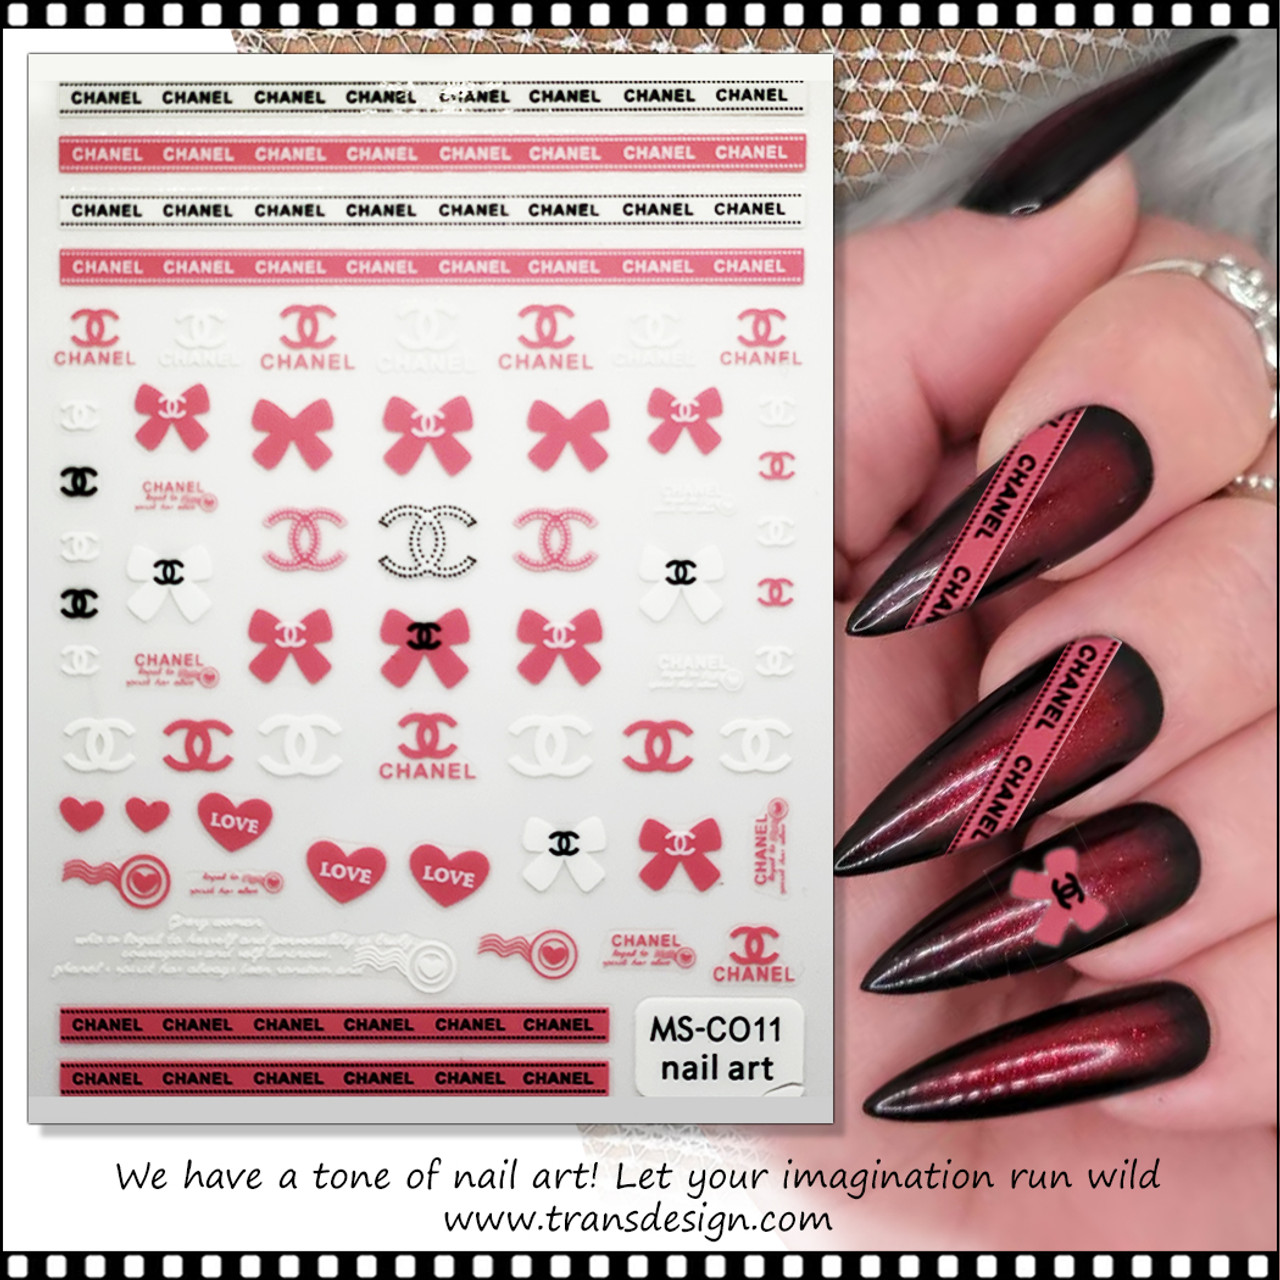 Channel nails designs | Chanel nails, Flare nails, Hair and nails